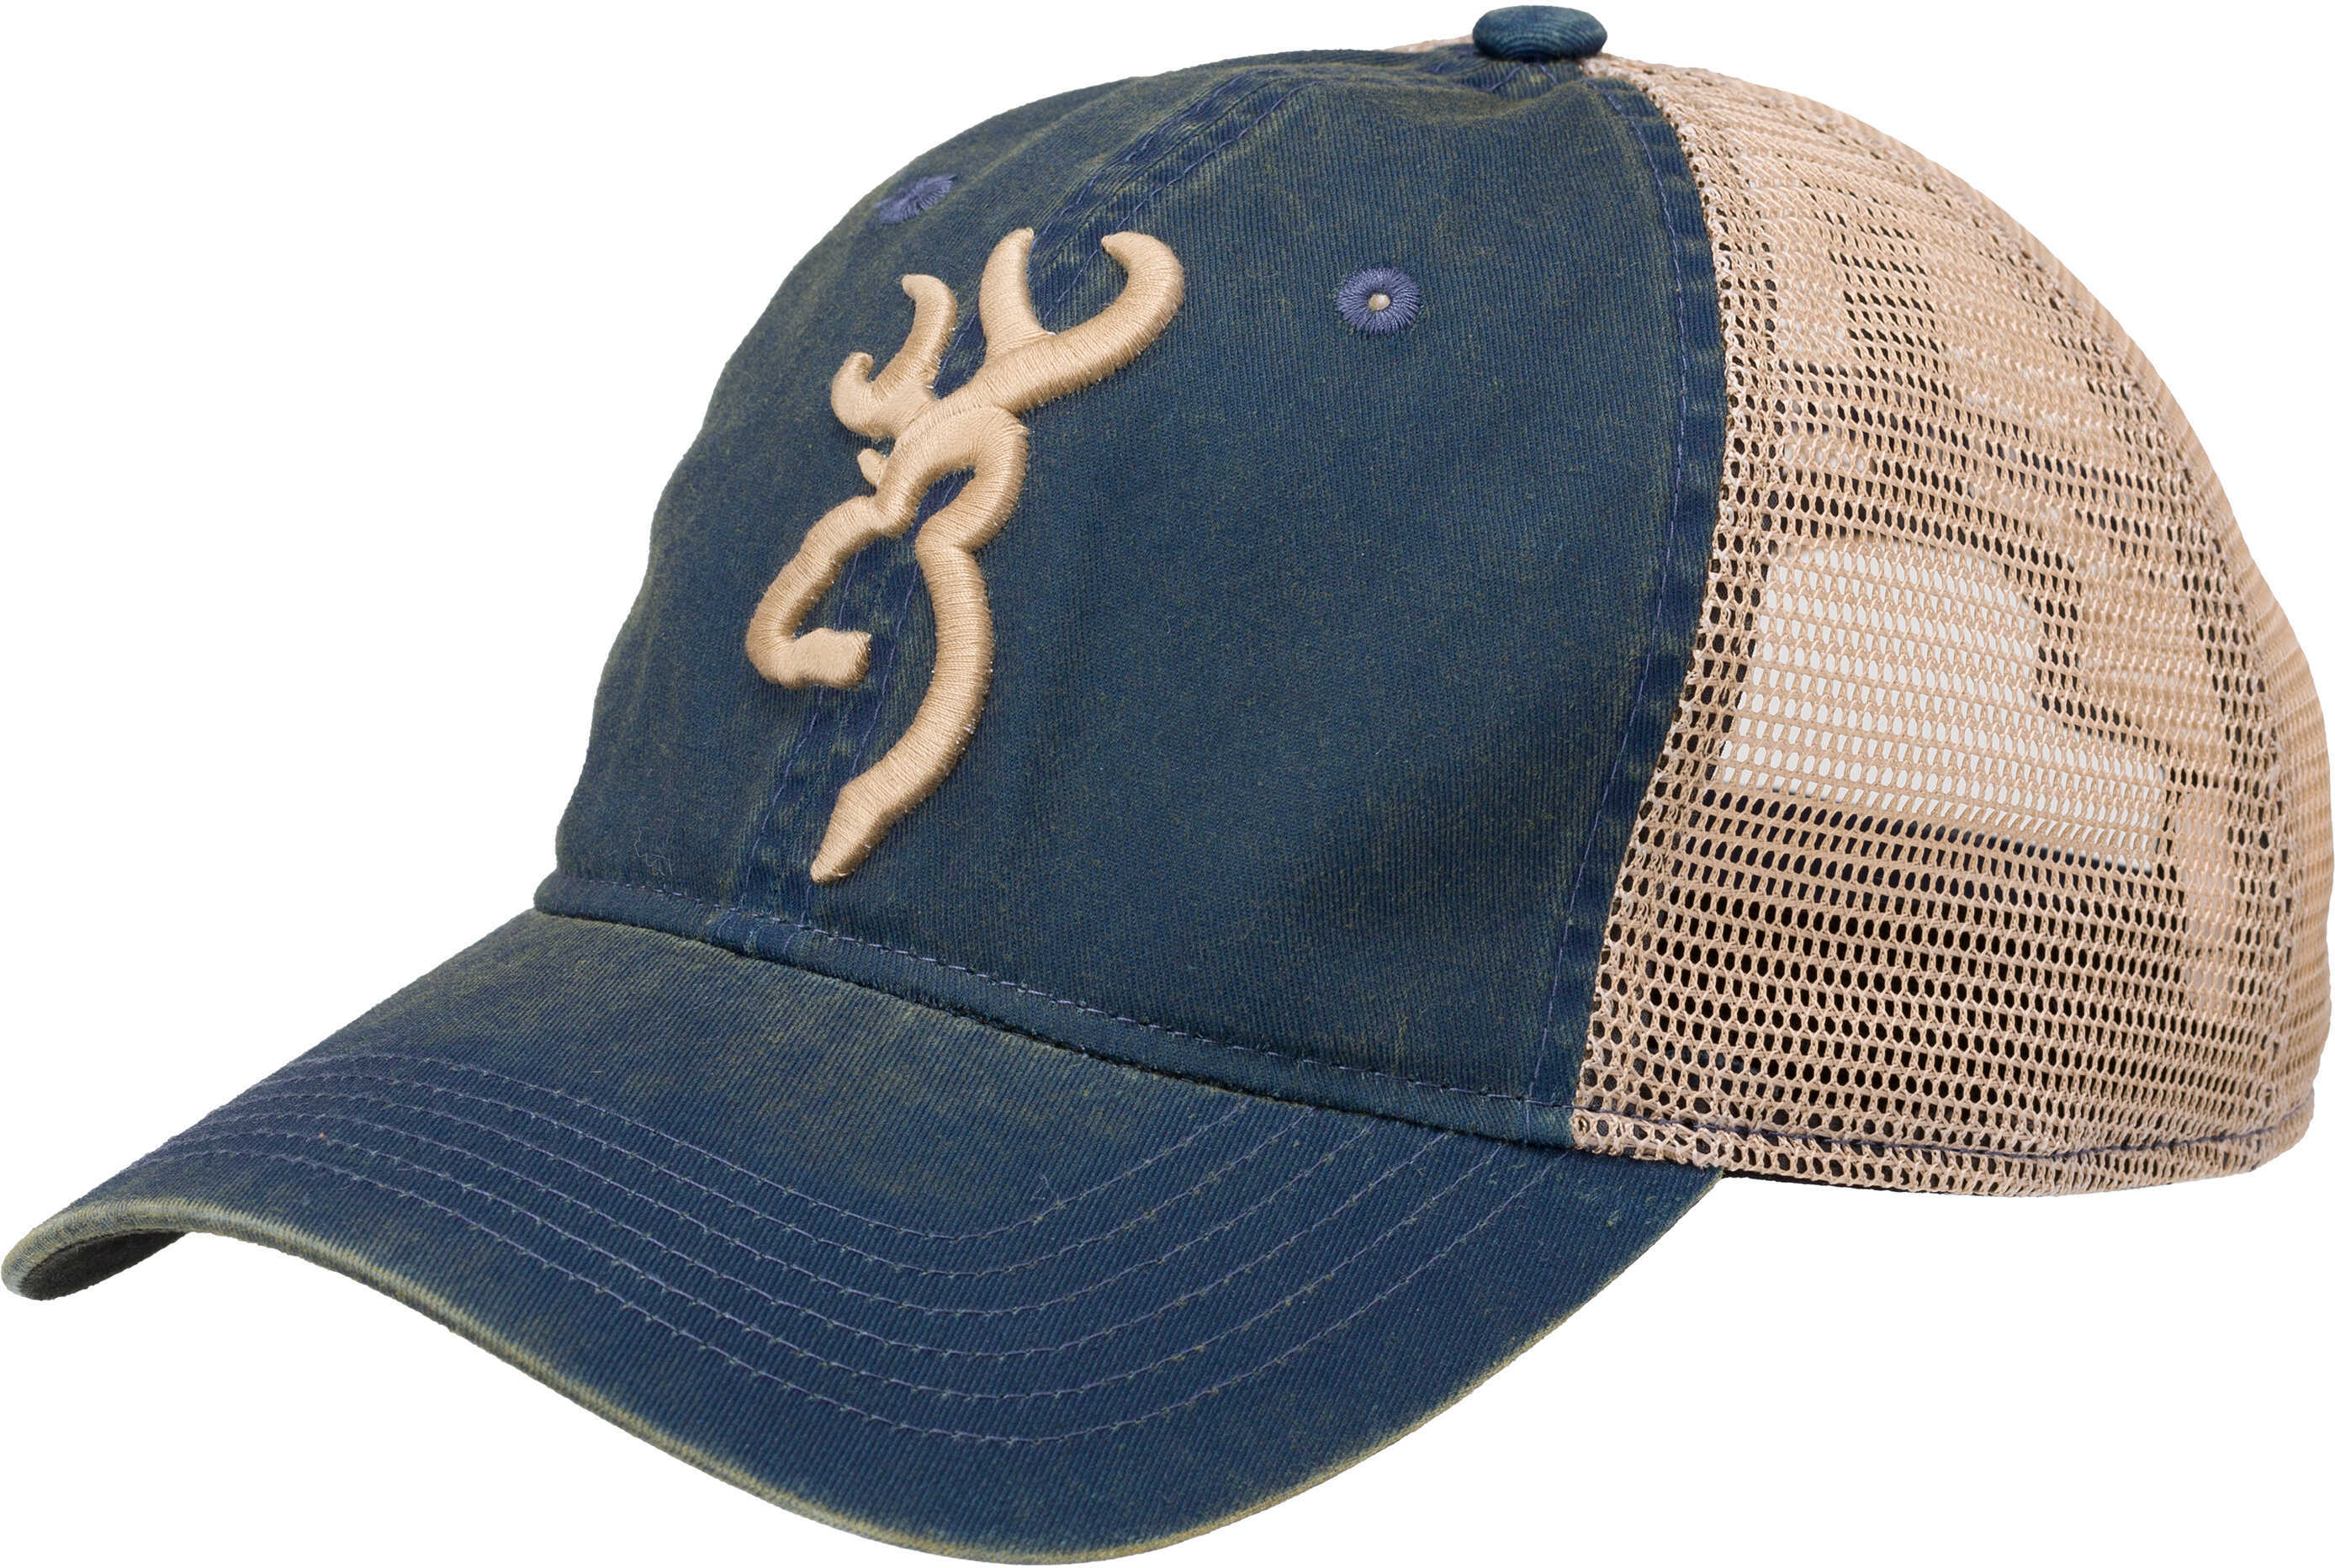 Browning Willow Hat Navy Model: 308723851